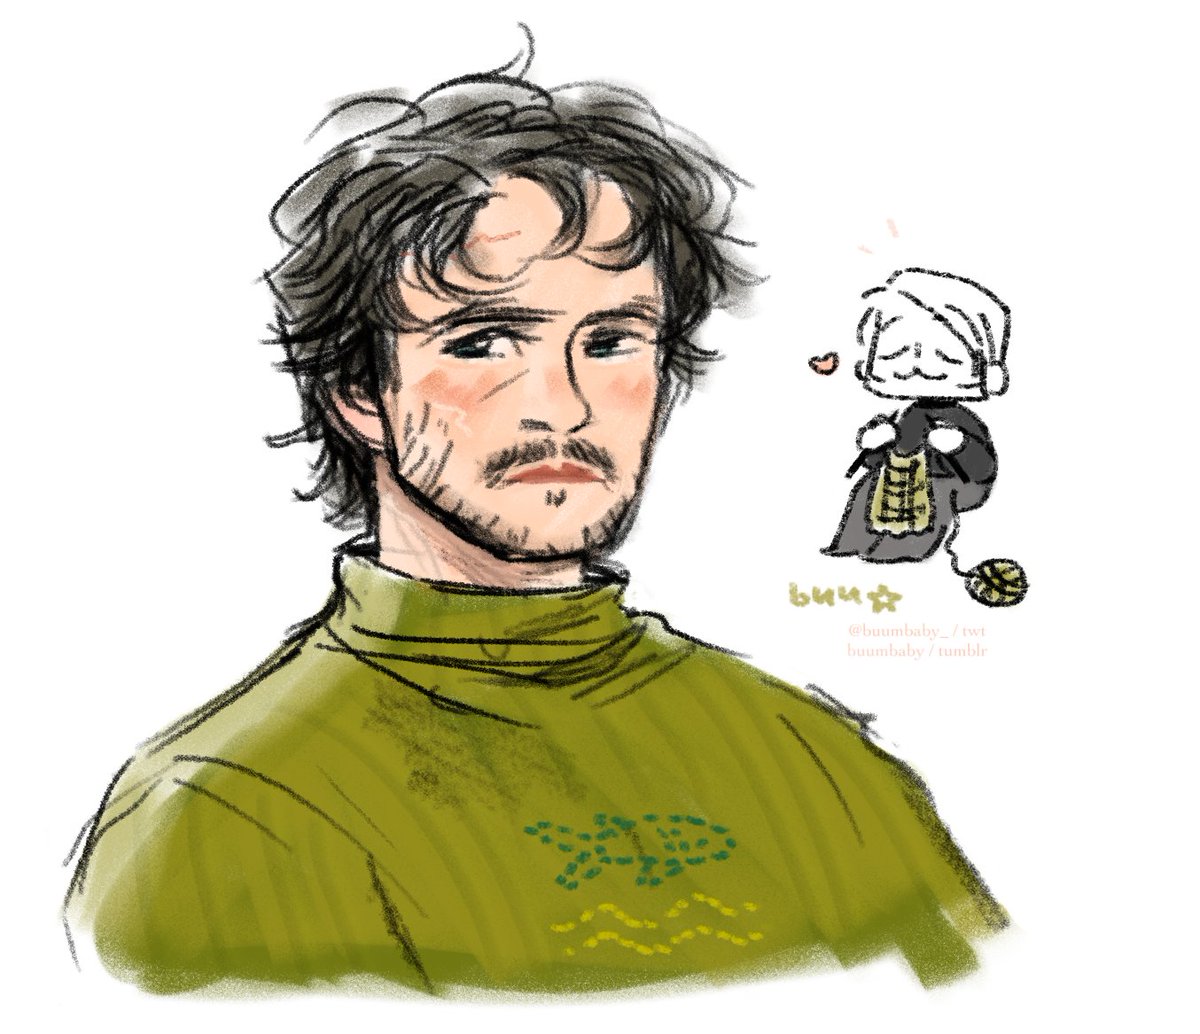 knitted fish sweater for the fish boy #hannigram